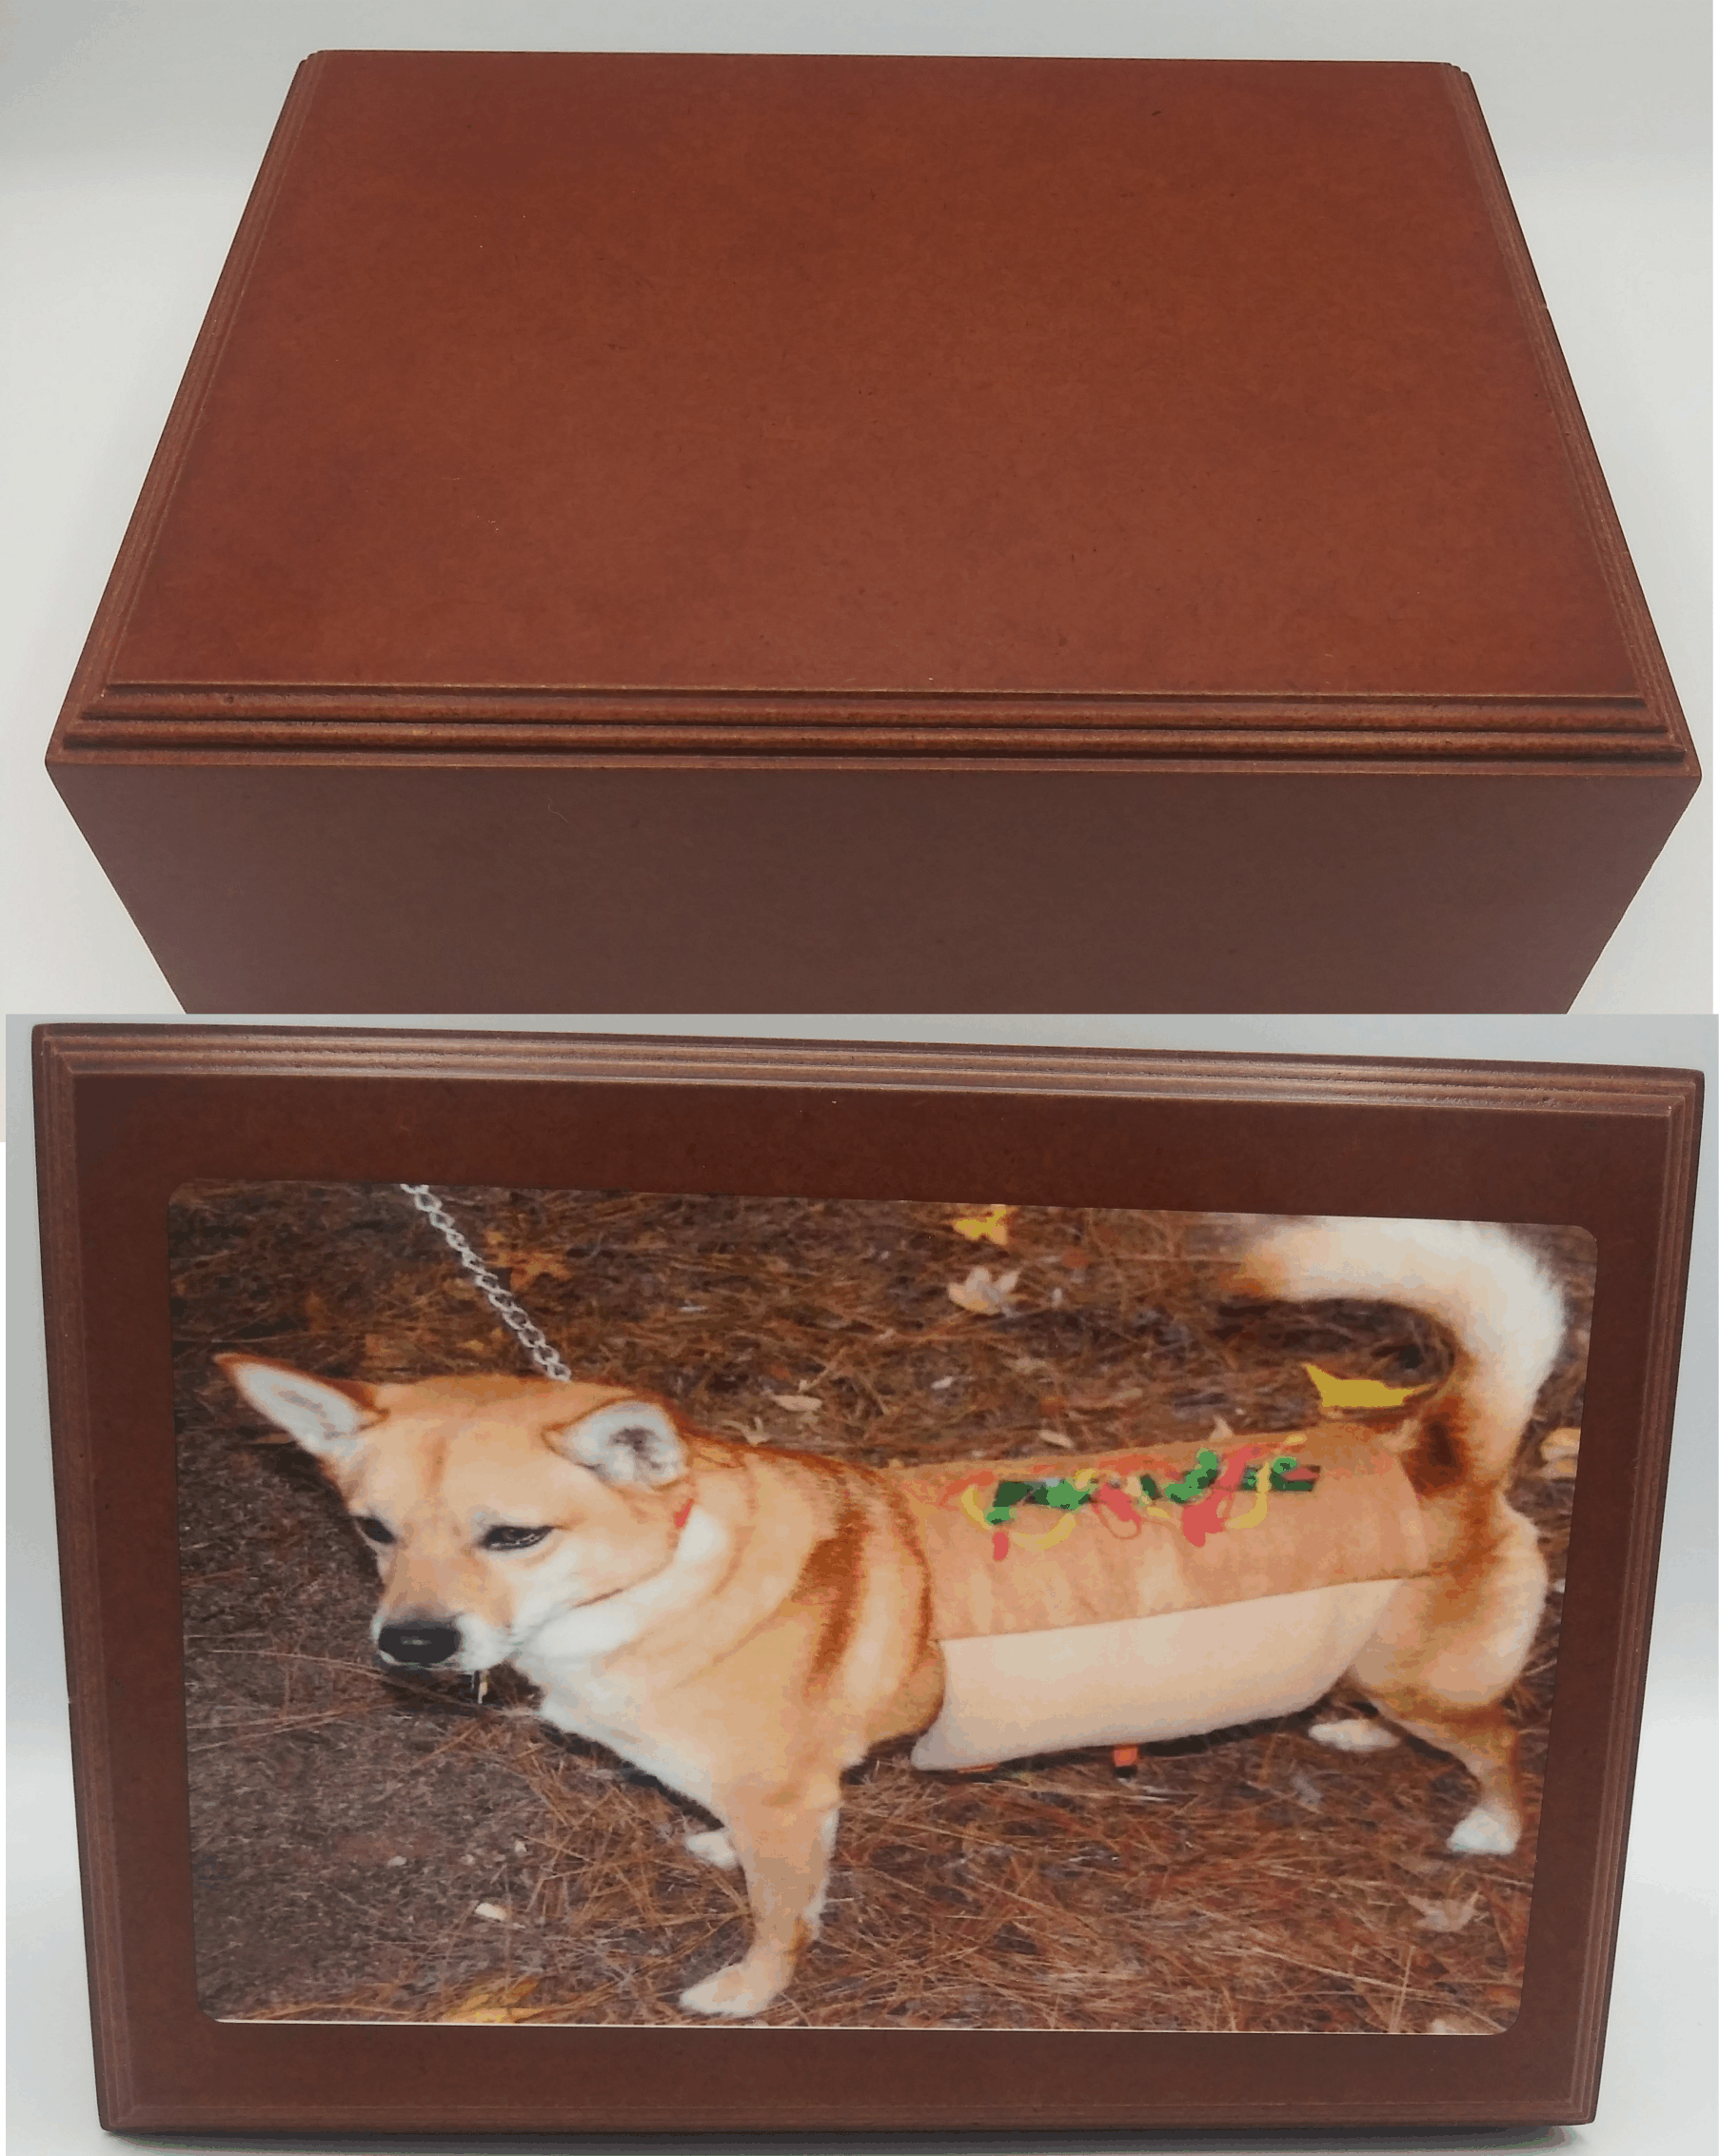 PET MEMORIAL BOX made with sublimation printing